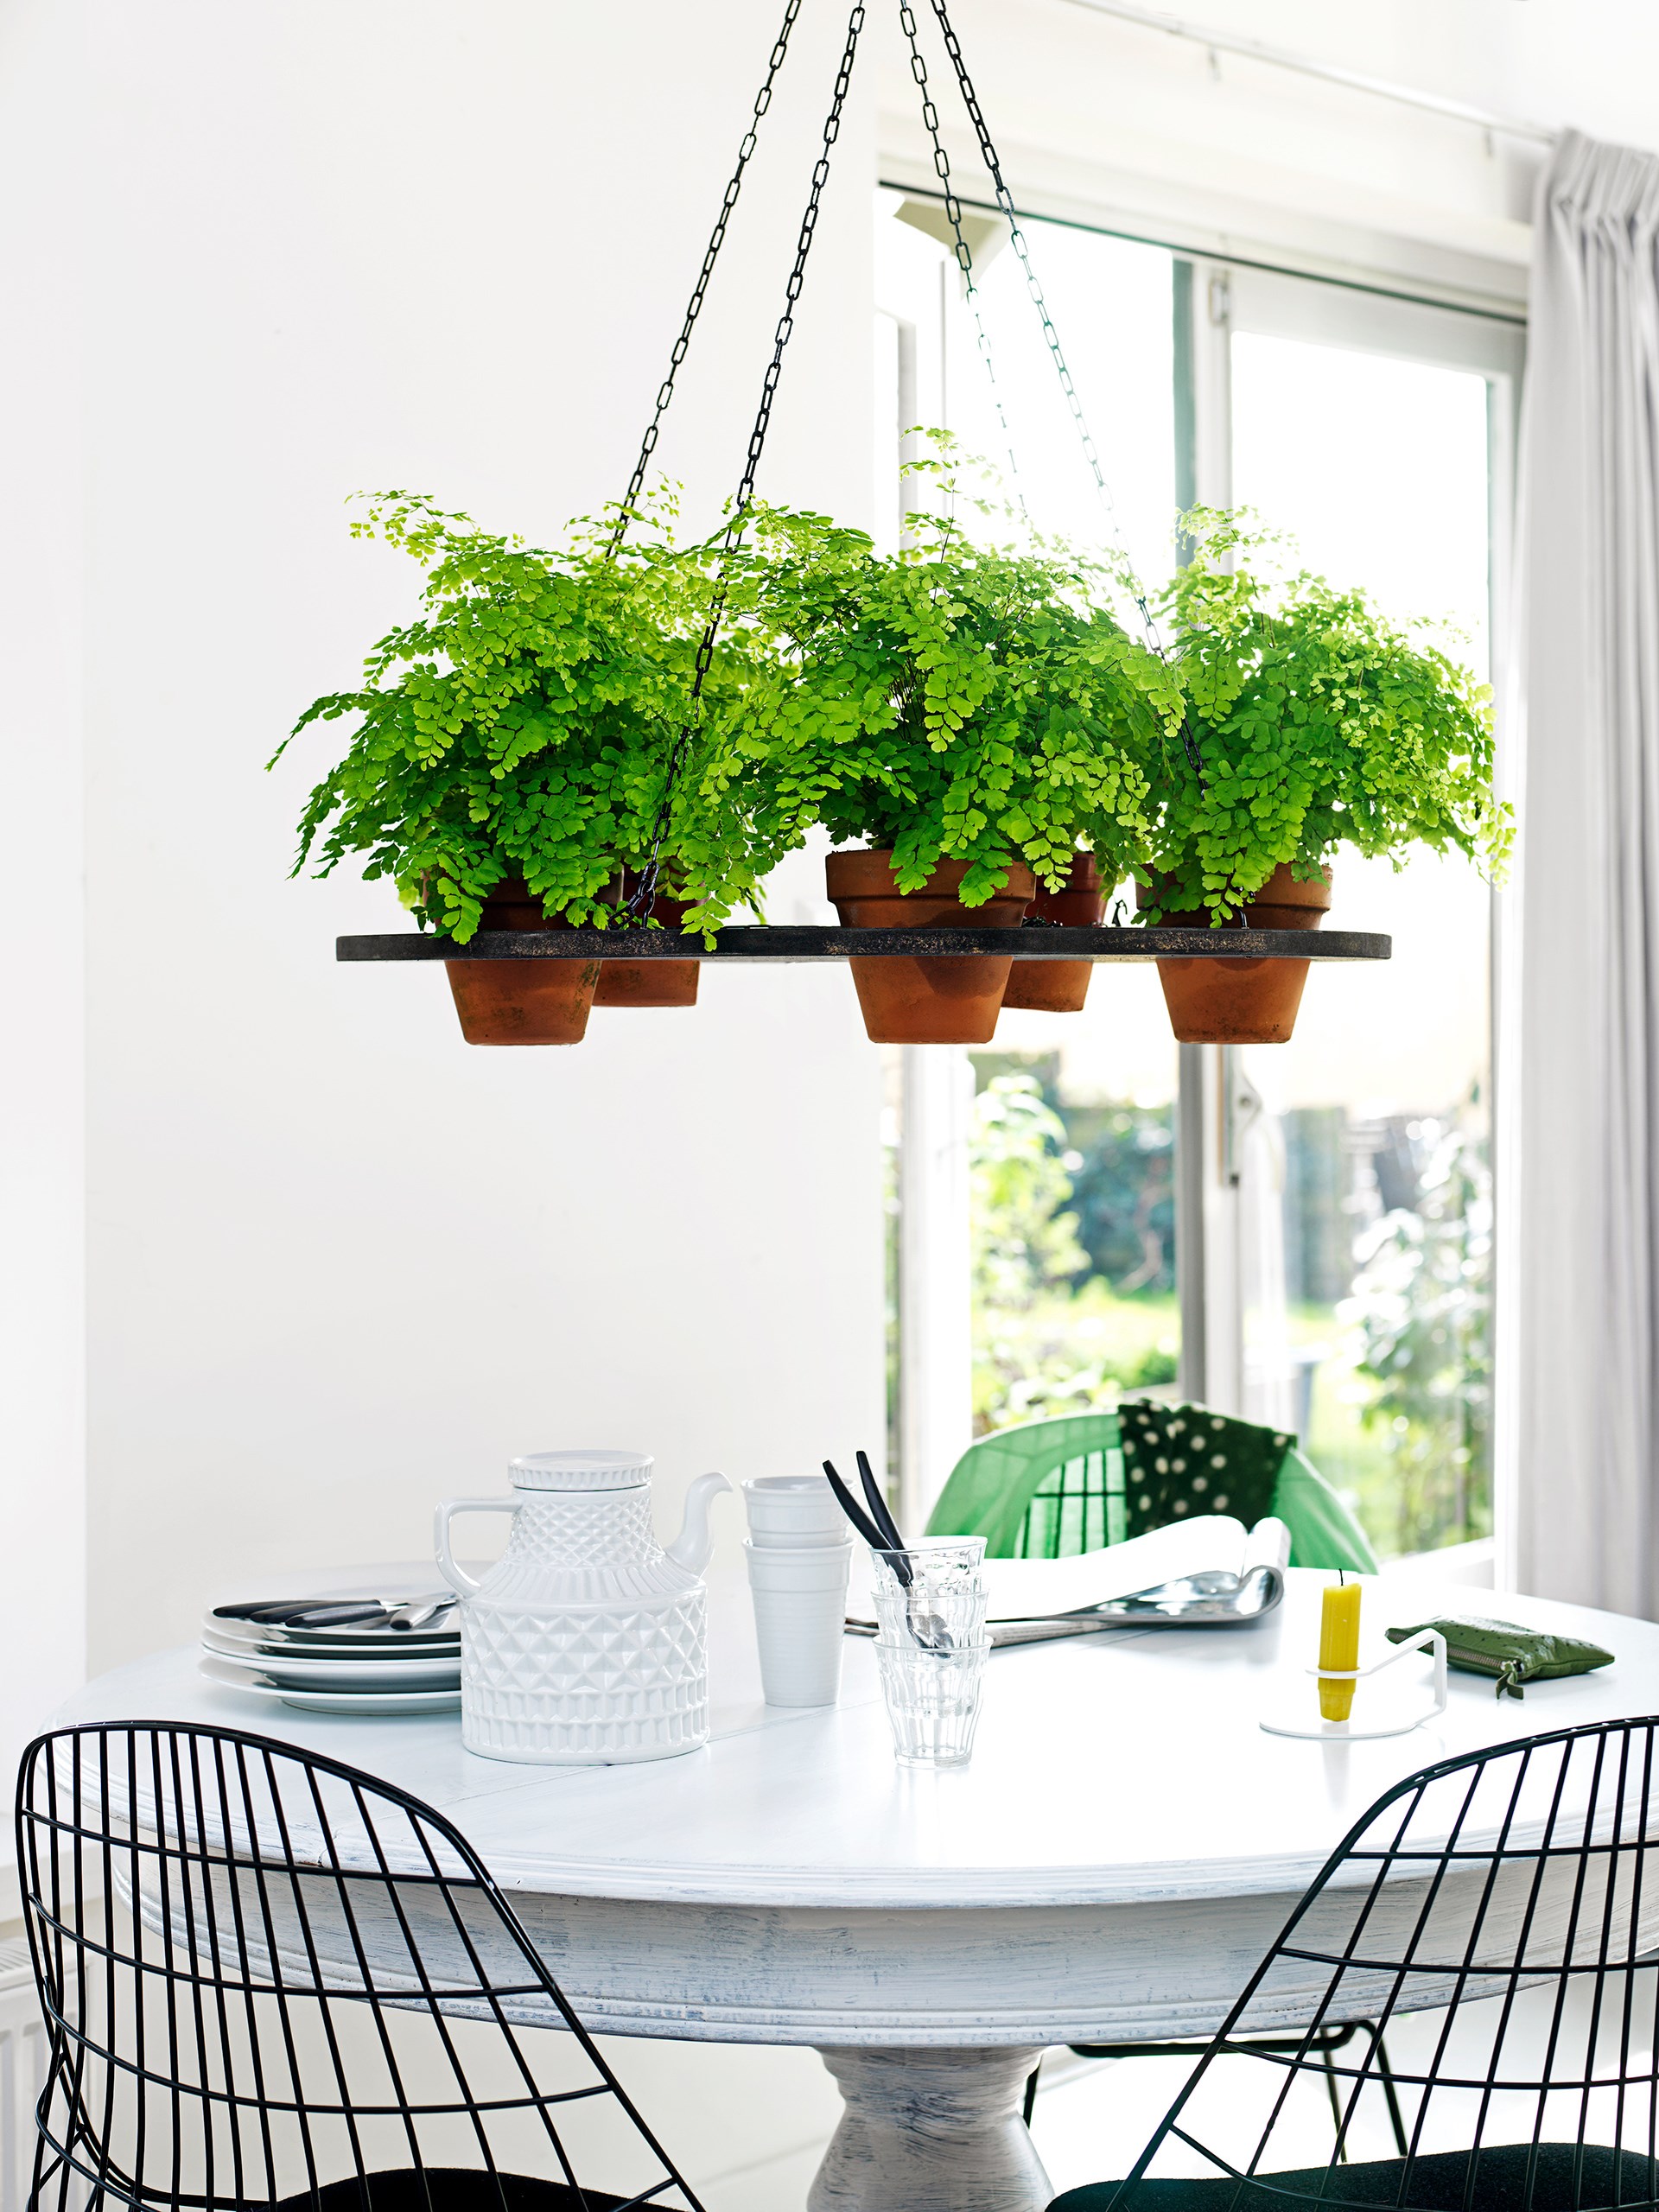 Bring your meeting table to life with some hanging greenery!